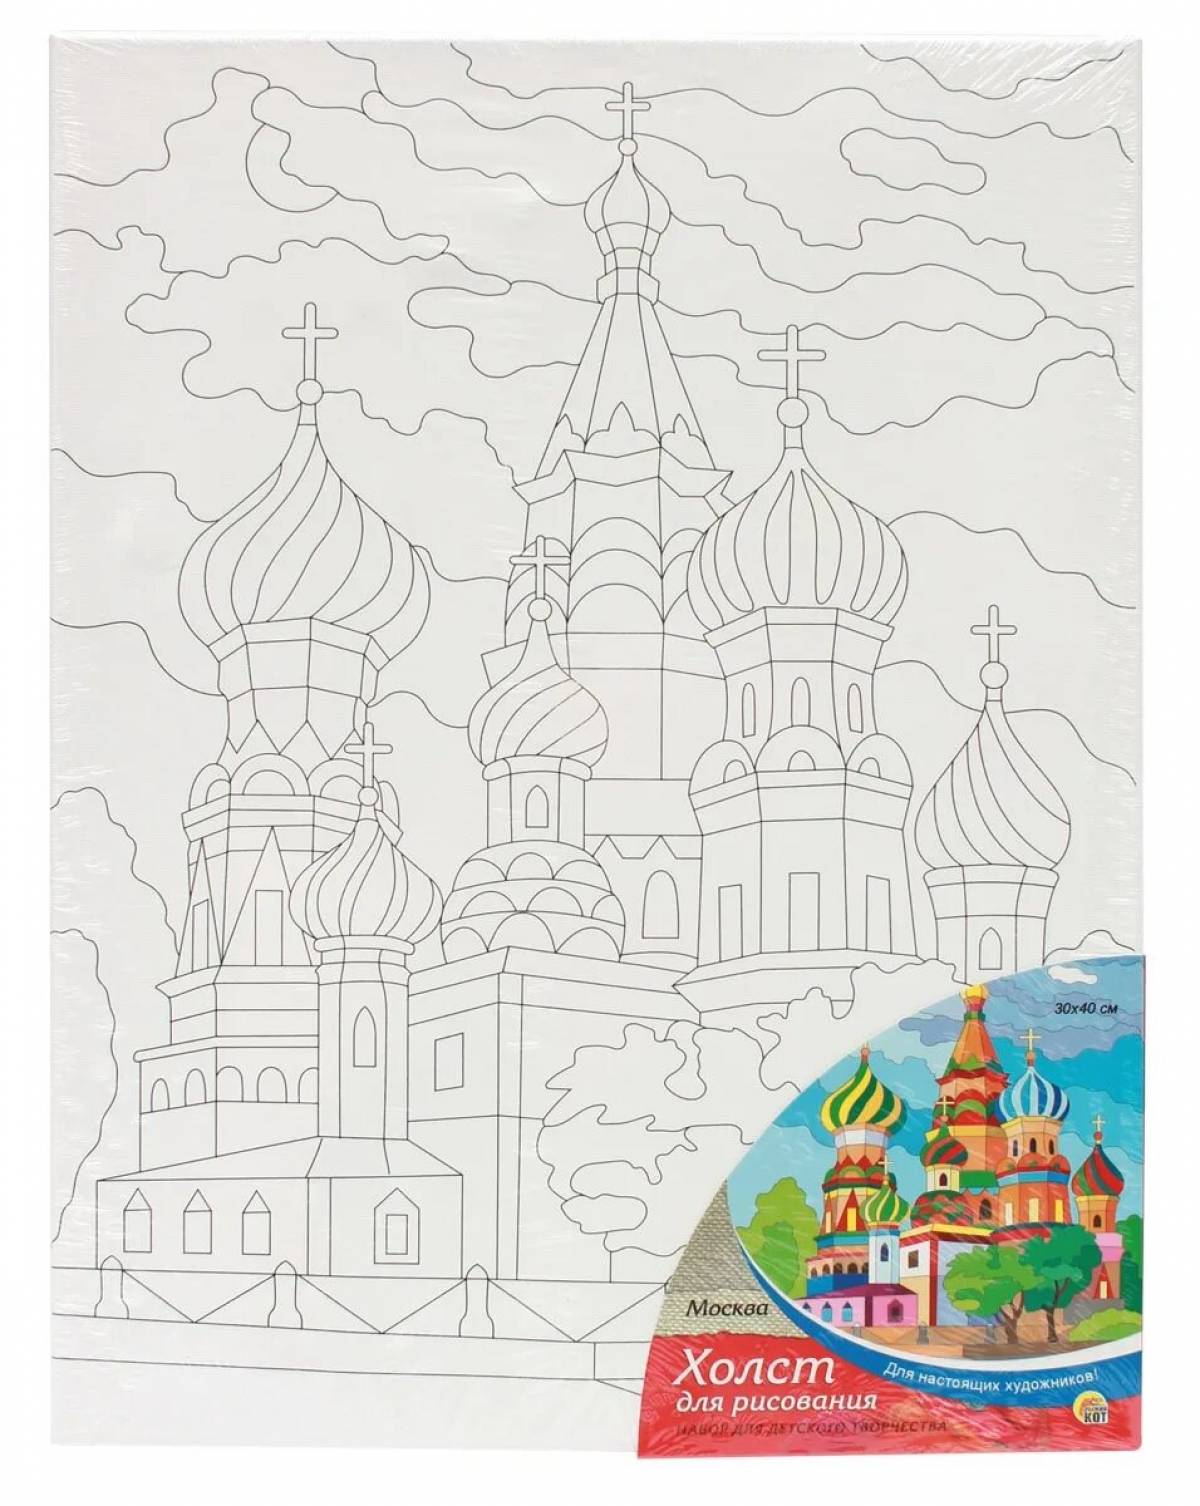 St. Basil's Cathedral #7